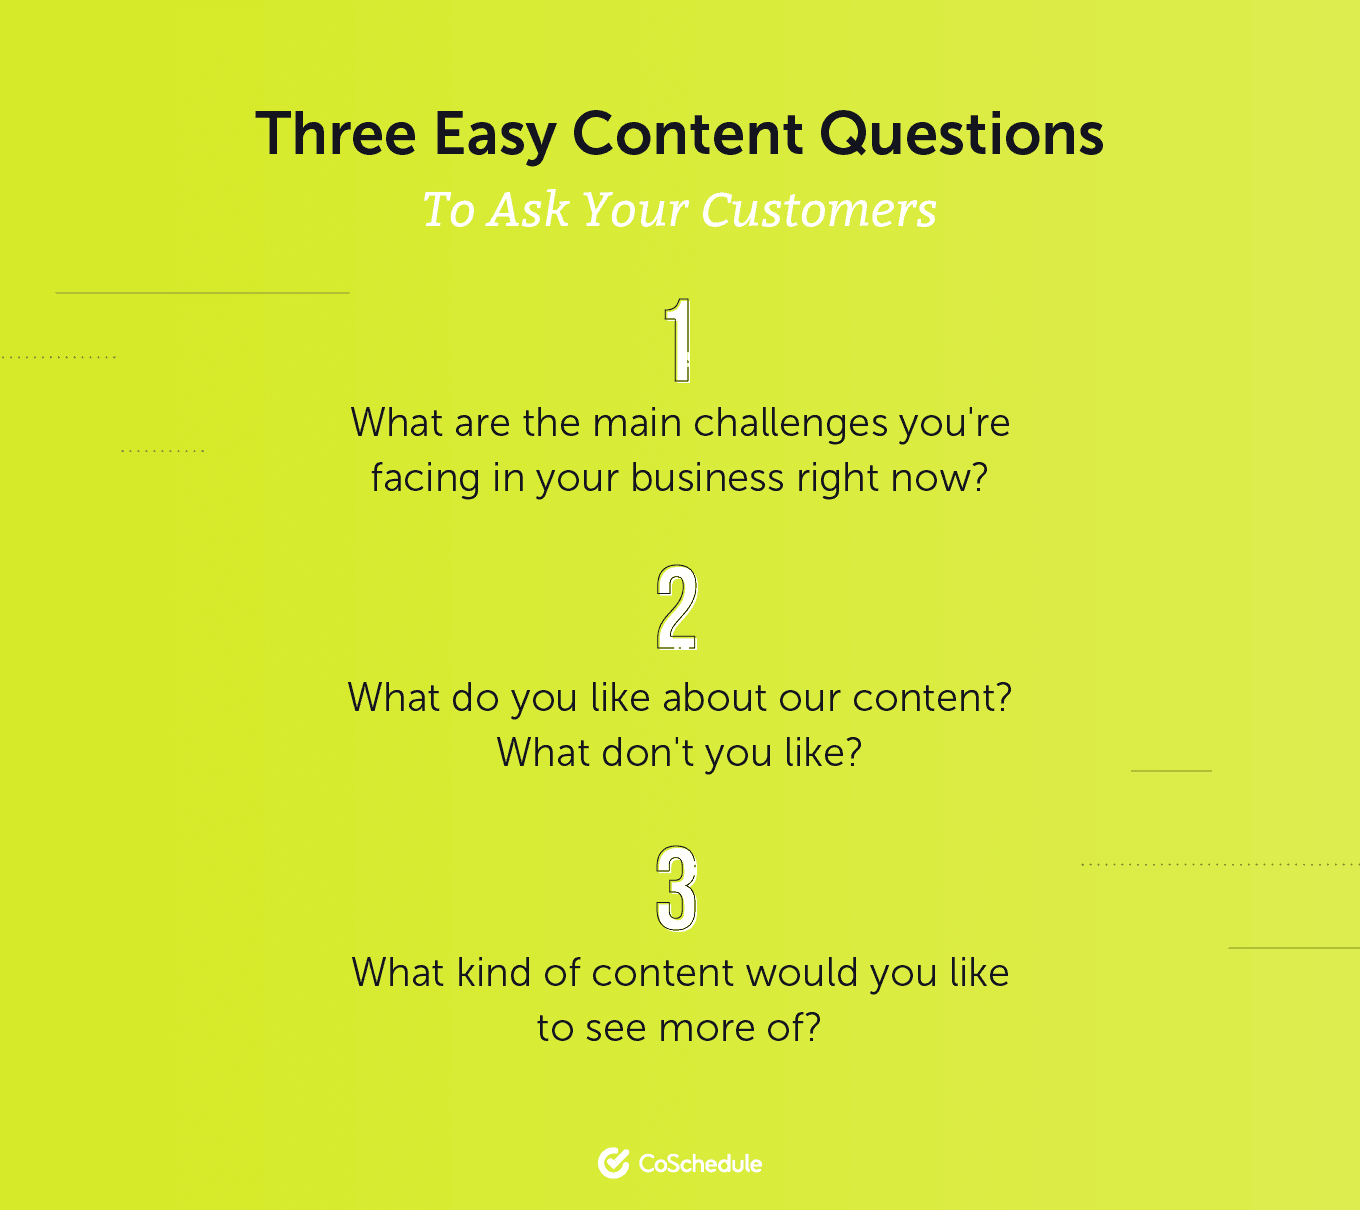 image states 3 easy content questions for businesses to ask their customers